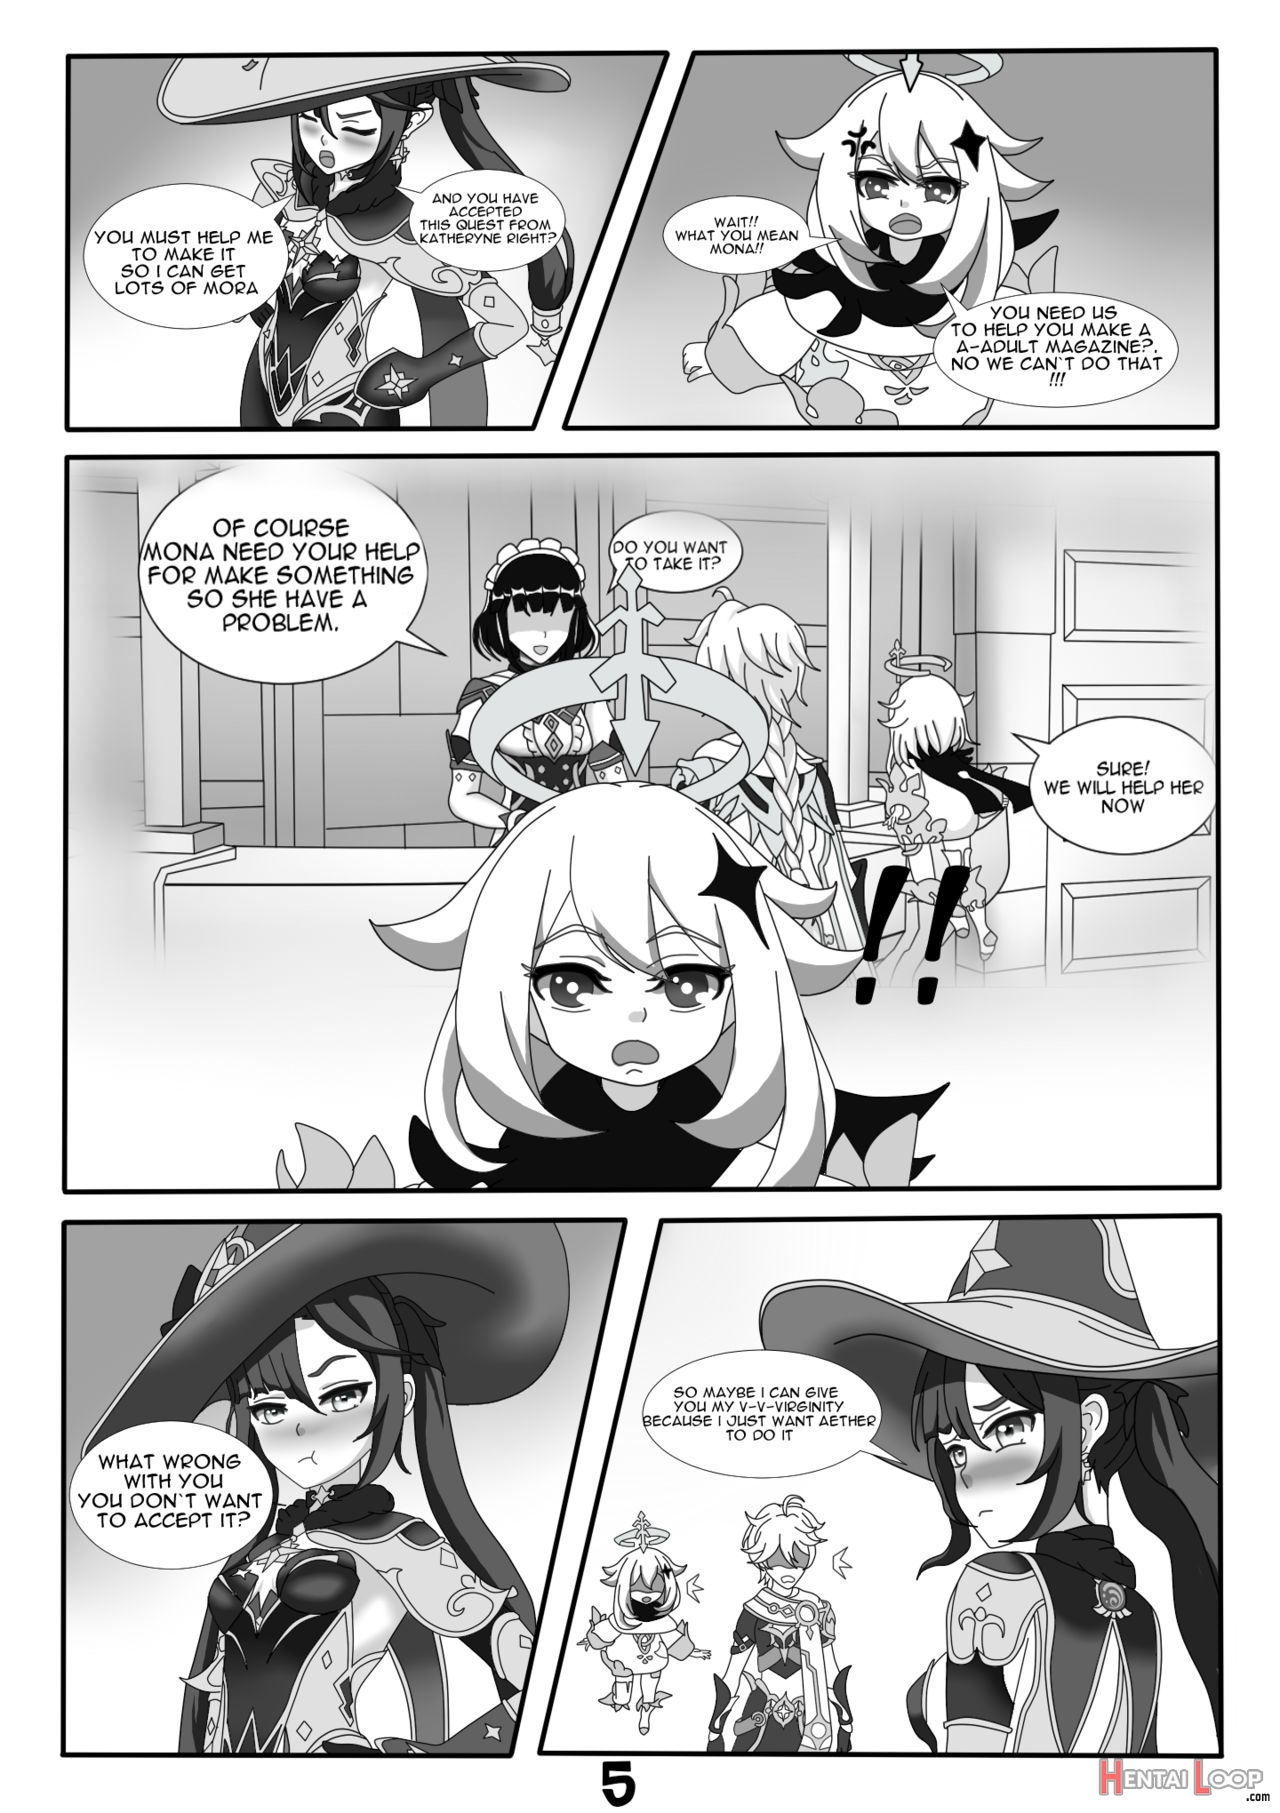 Quest 1 page 6